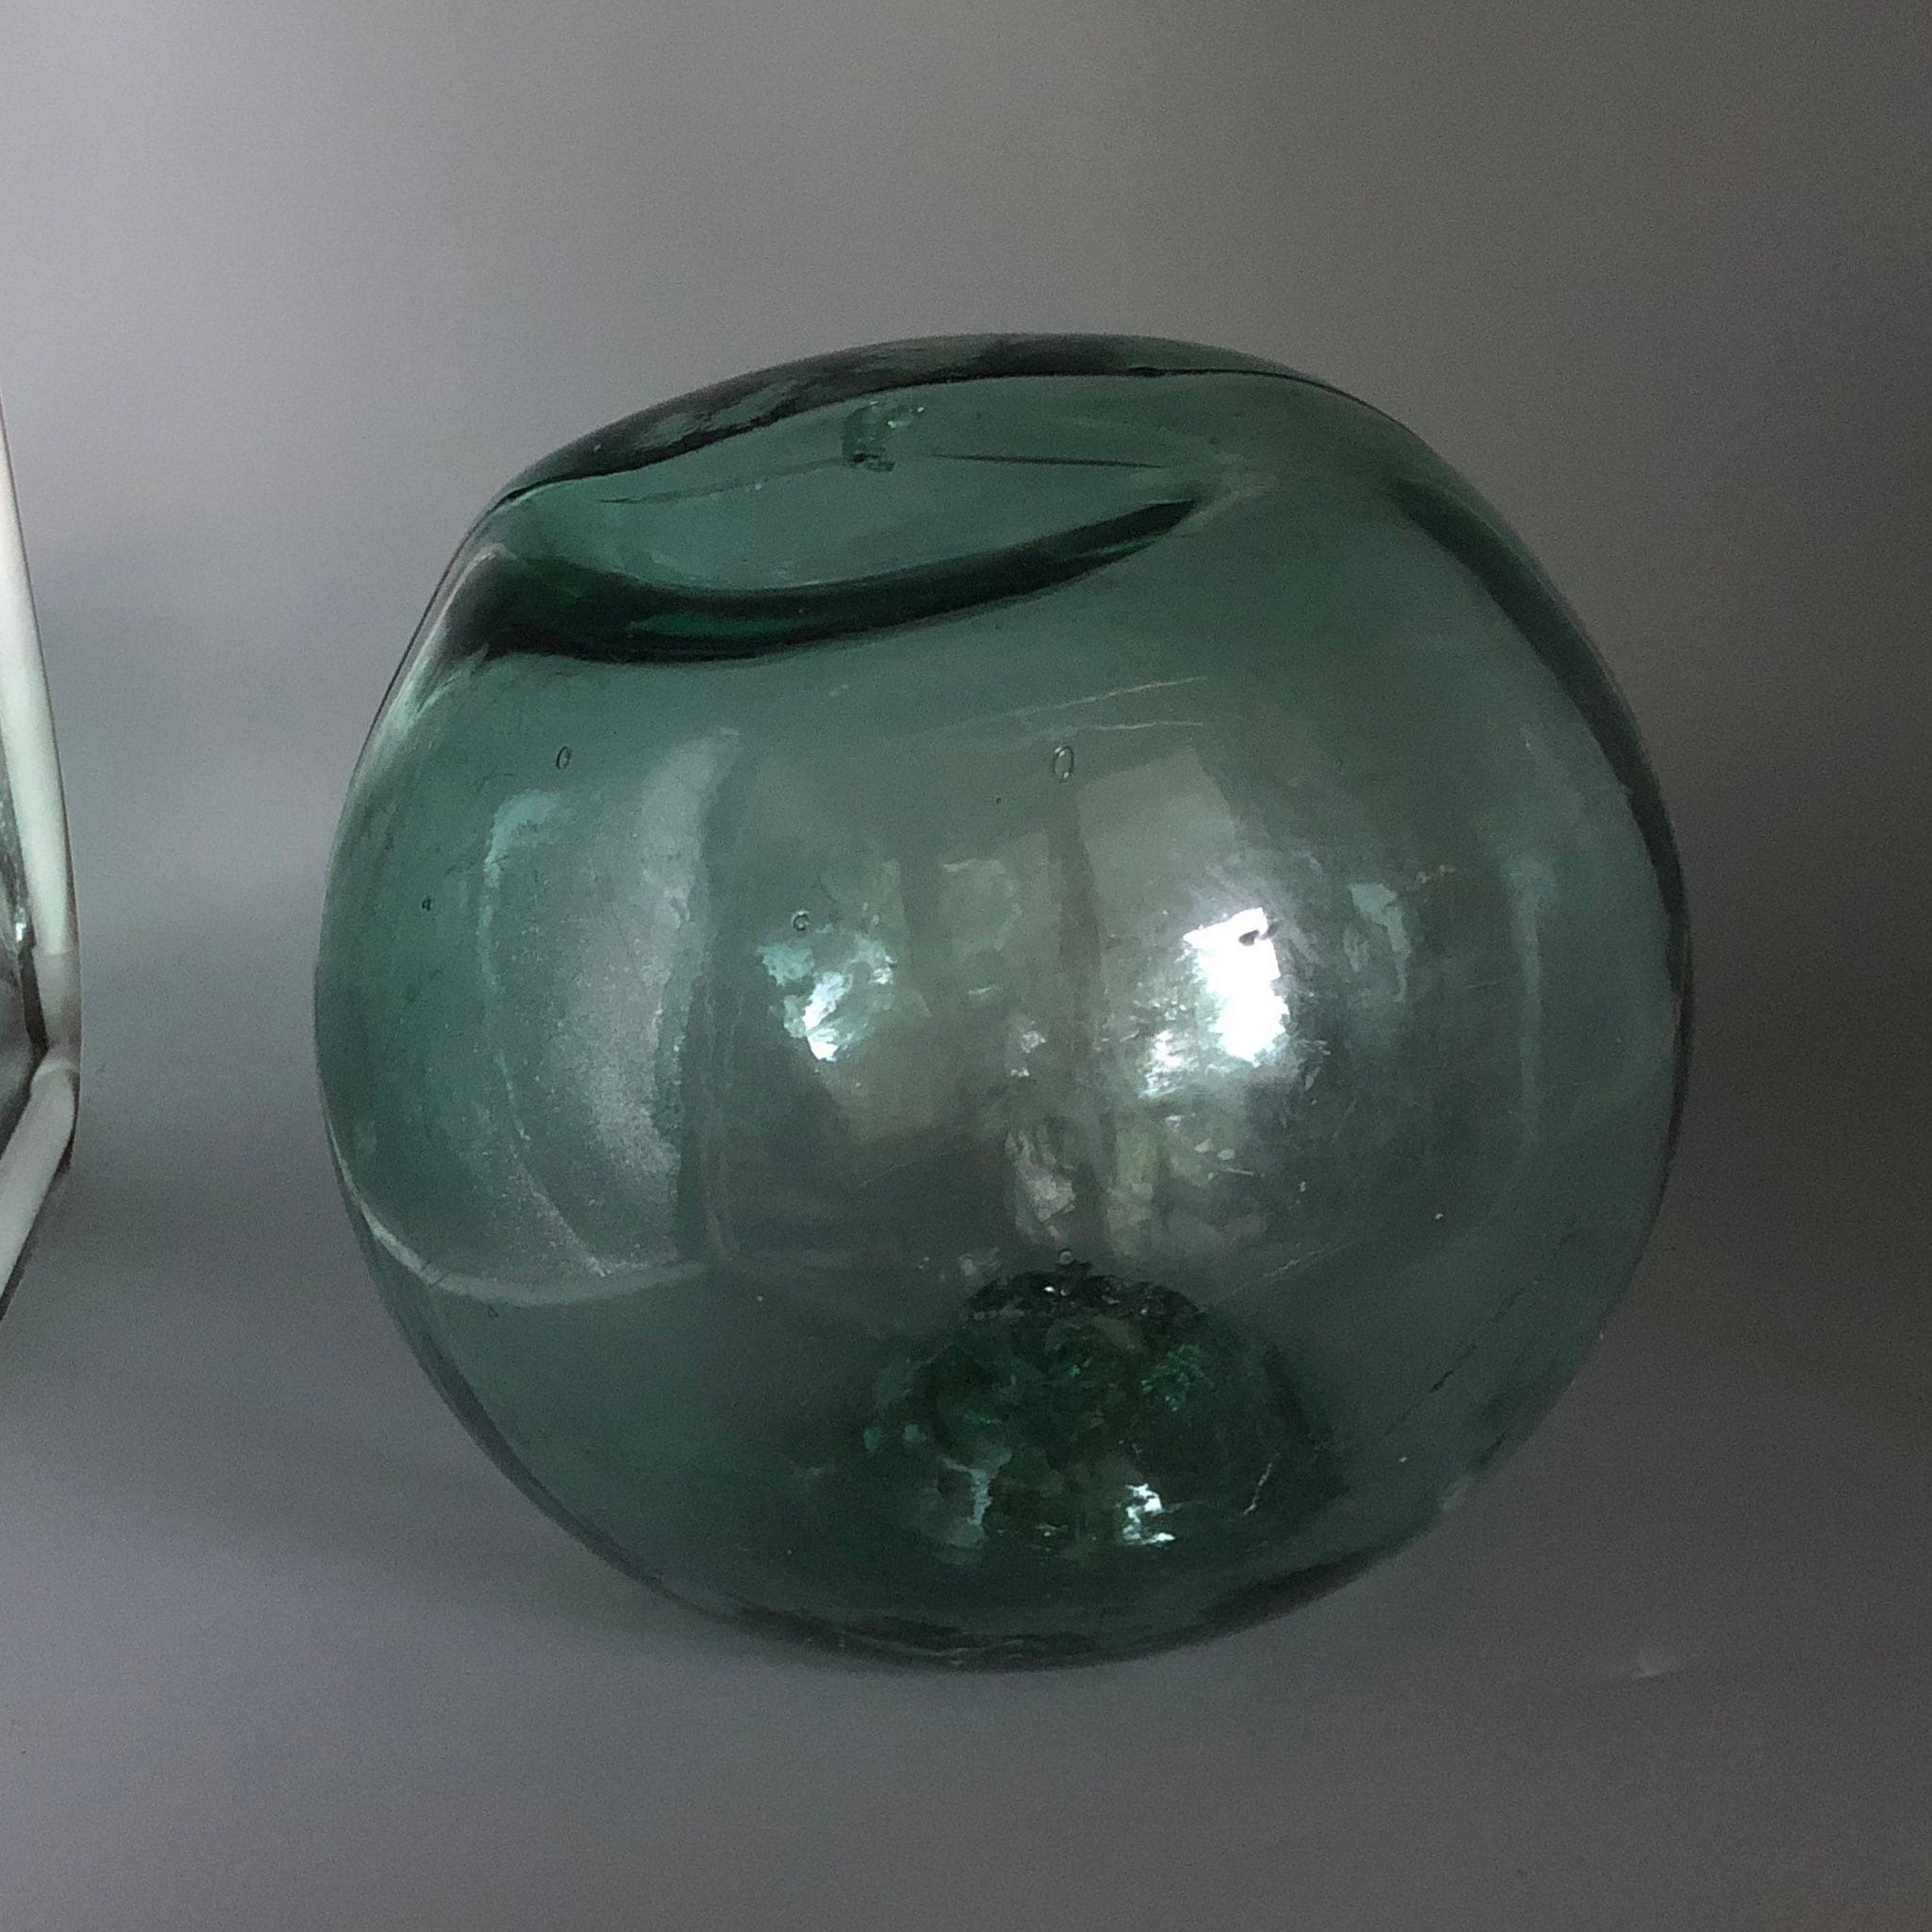 2.5 Japanese Glass Floats w/ Netting, Vintage Fishing Buoys From